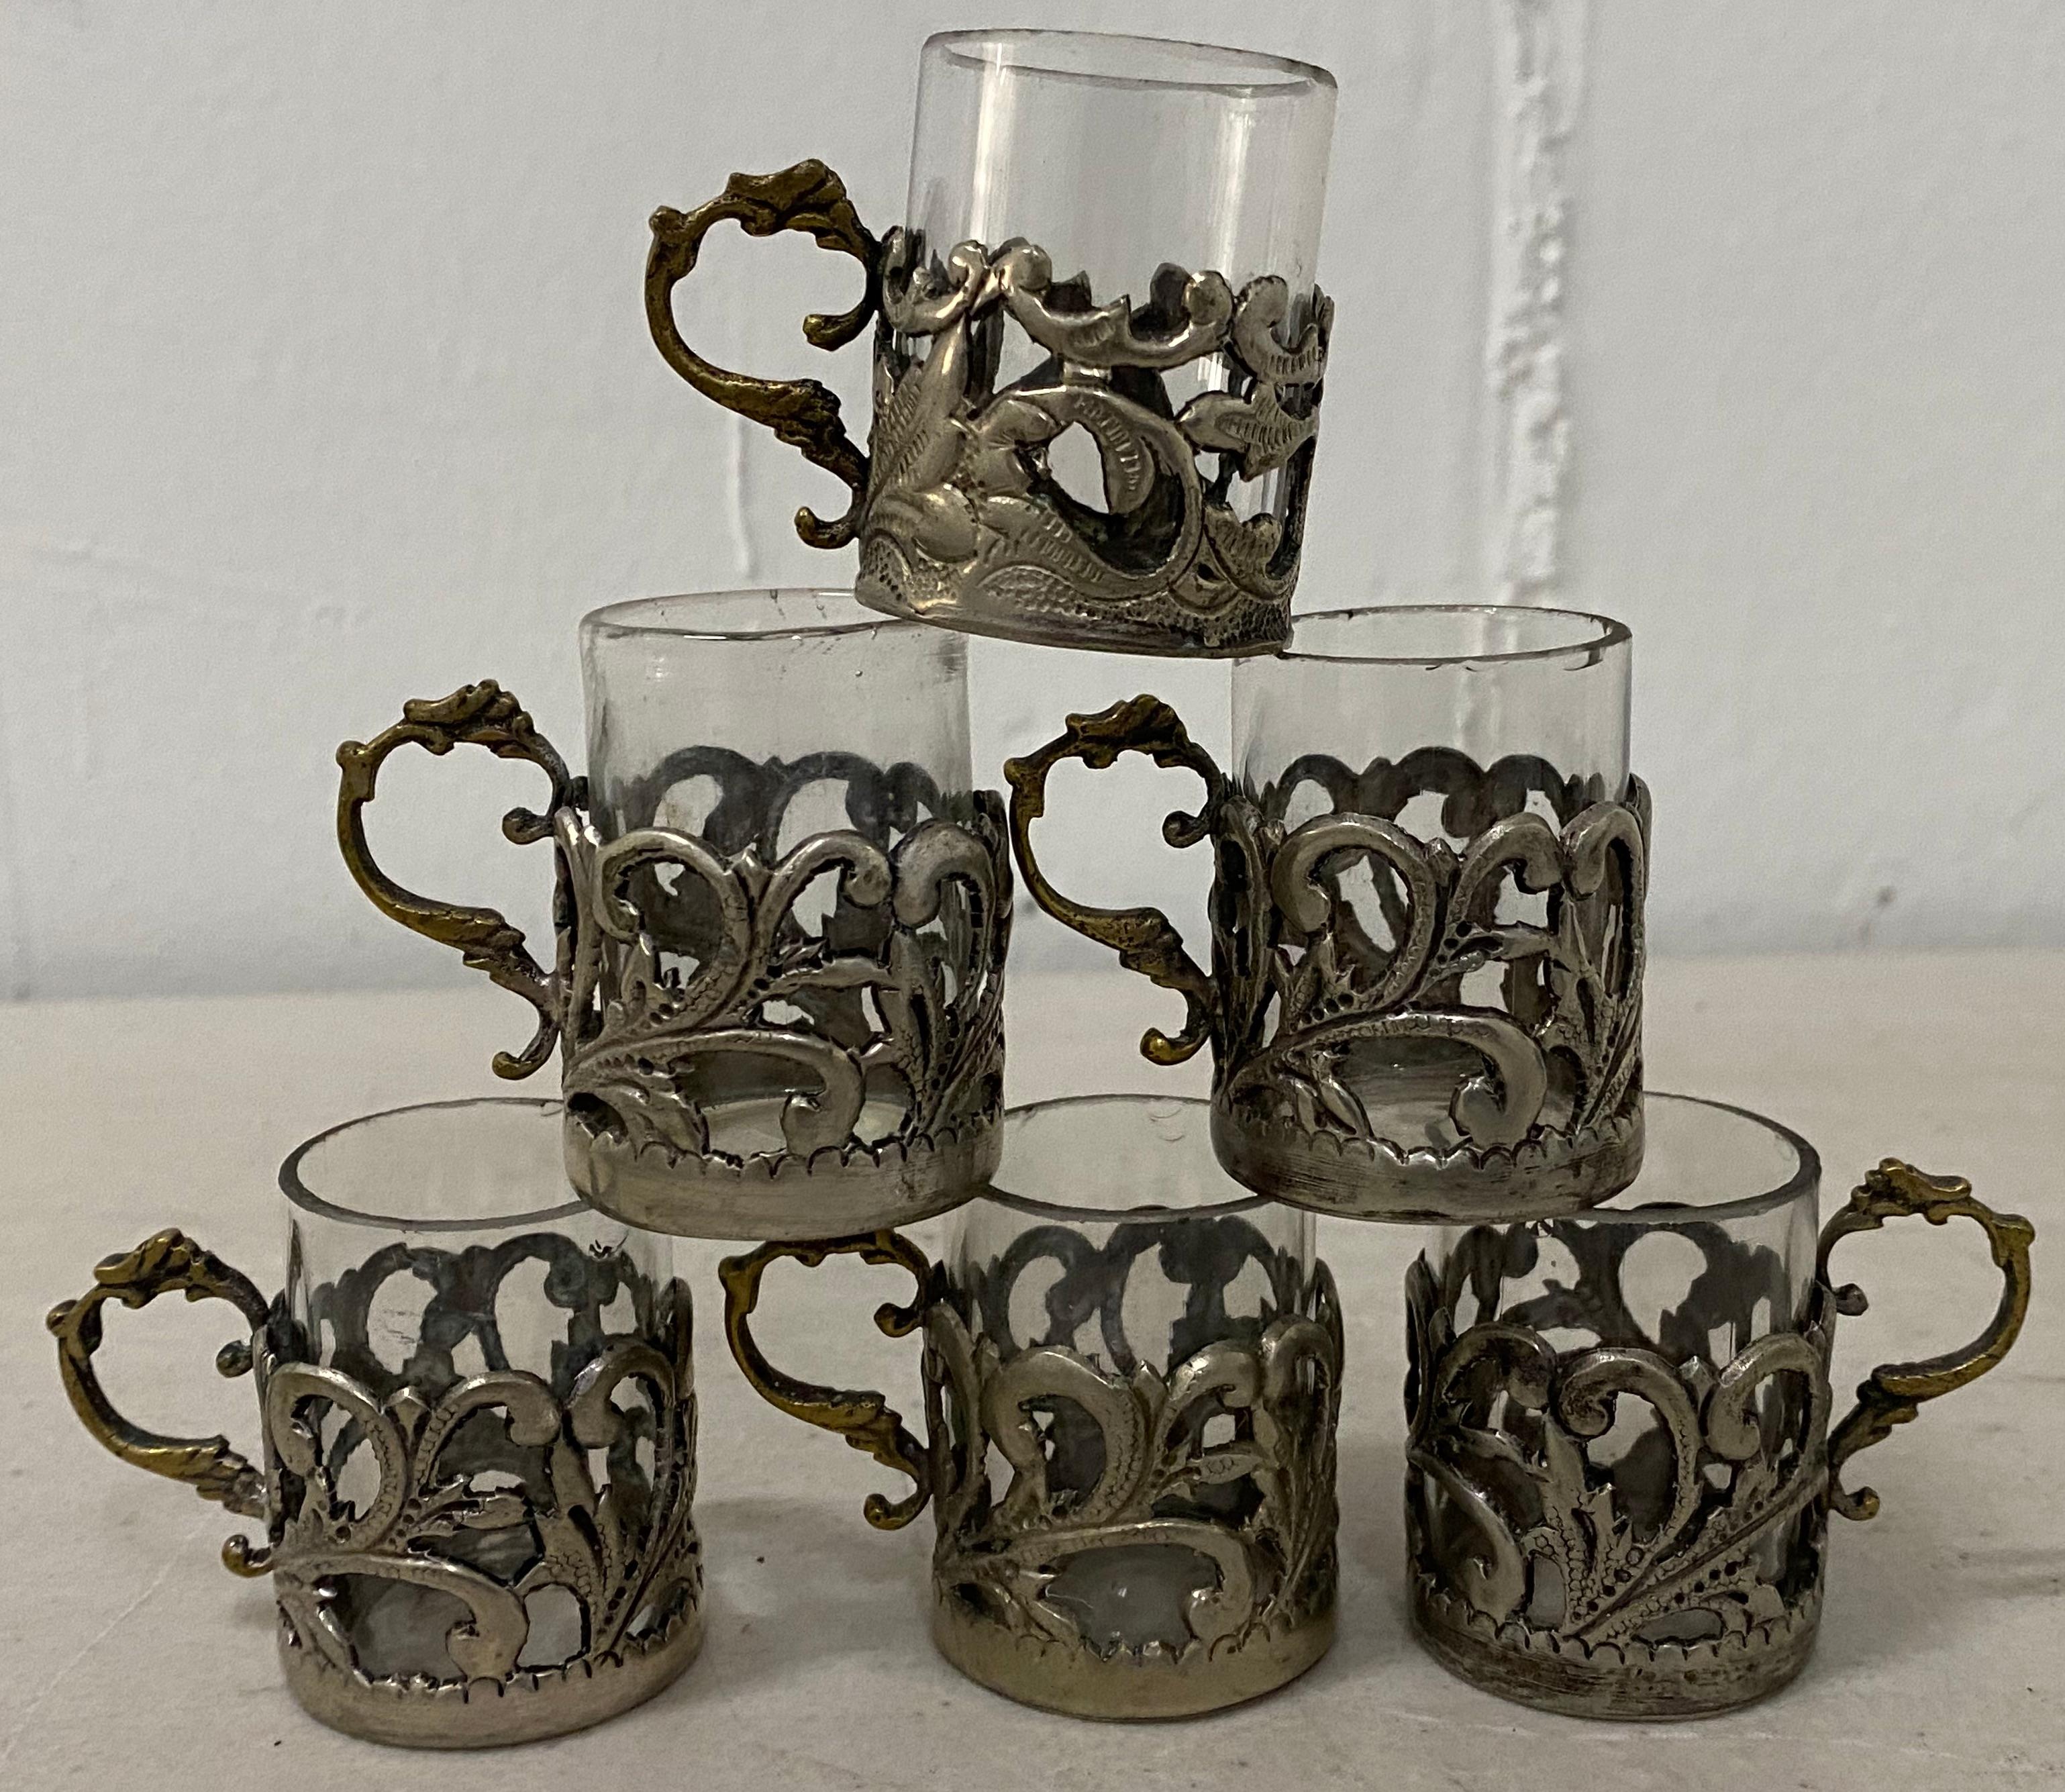 19th century miniature sterling silver liquor cup holders with glass inserts

Set of twelve

Six with glass inserts

Miniature dessert liquor cup holders

Handmade

A few have indecipherable hallmarks (see images)

Measures: 1.25